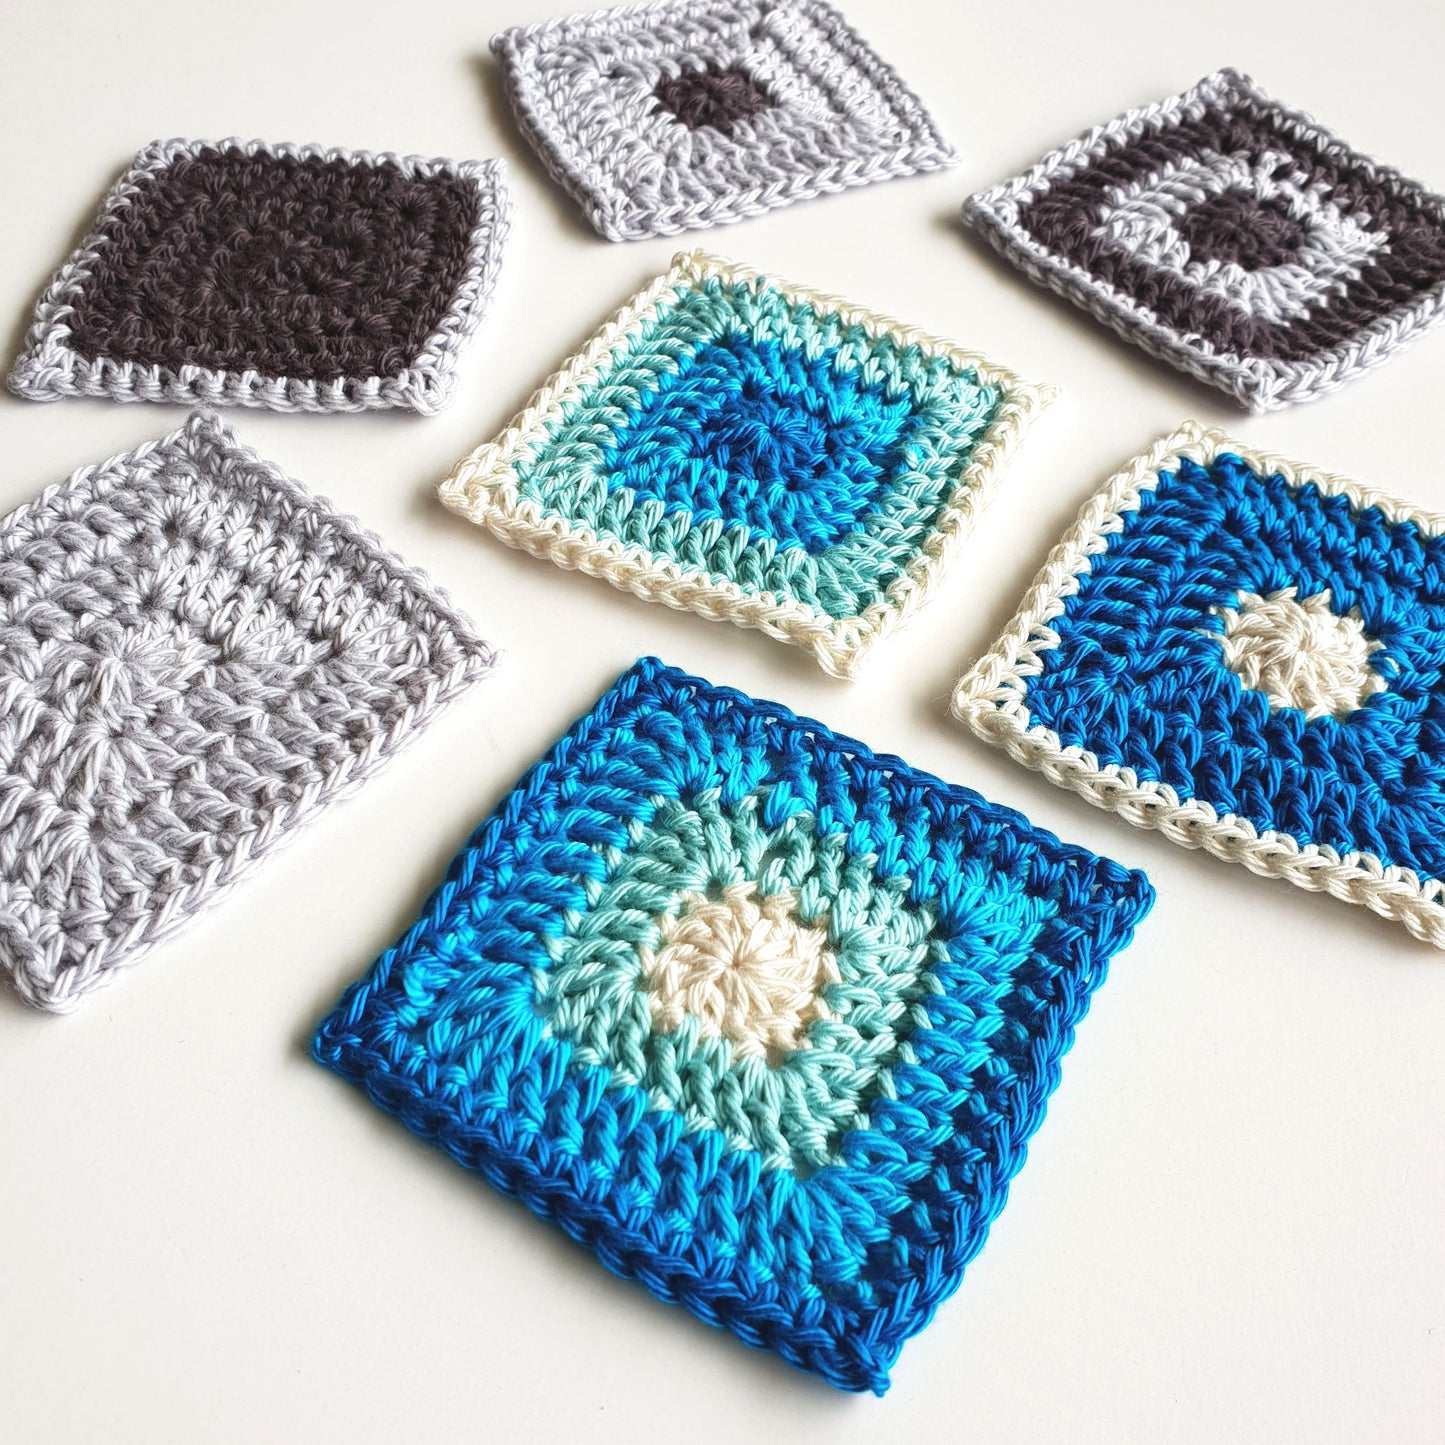 Seven Scraptastic Square Pattern granny squares by Shelley Husband